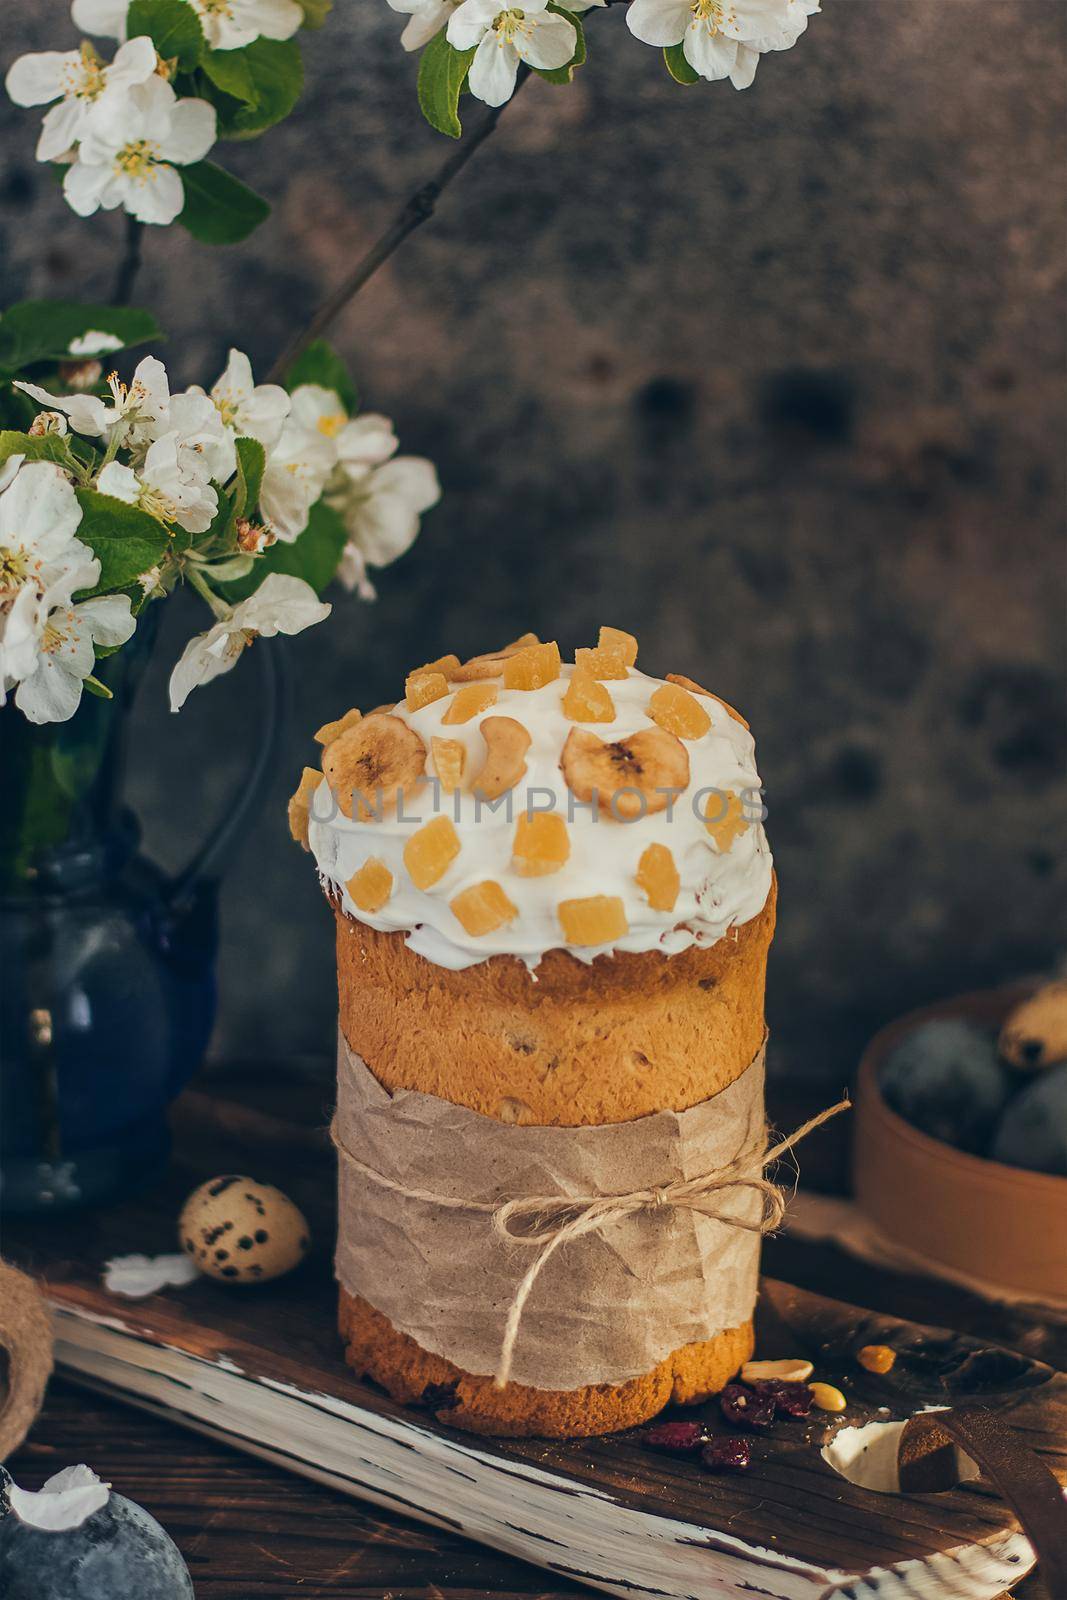 Traditional Russian Orthodox Easter bread kulich with apple blossom and colored eggs in rustic style background by mmp1206